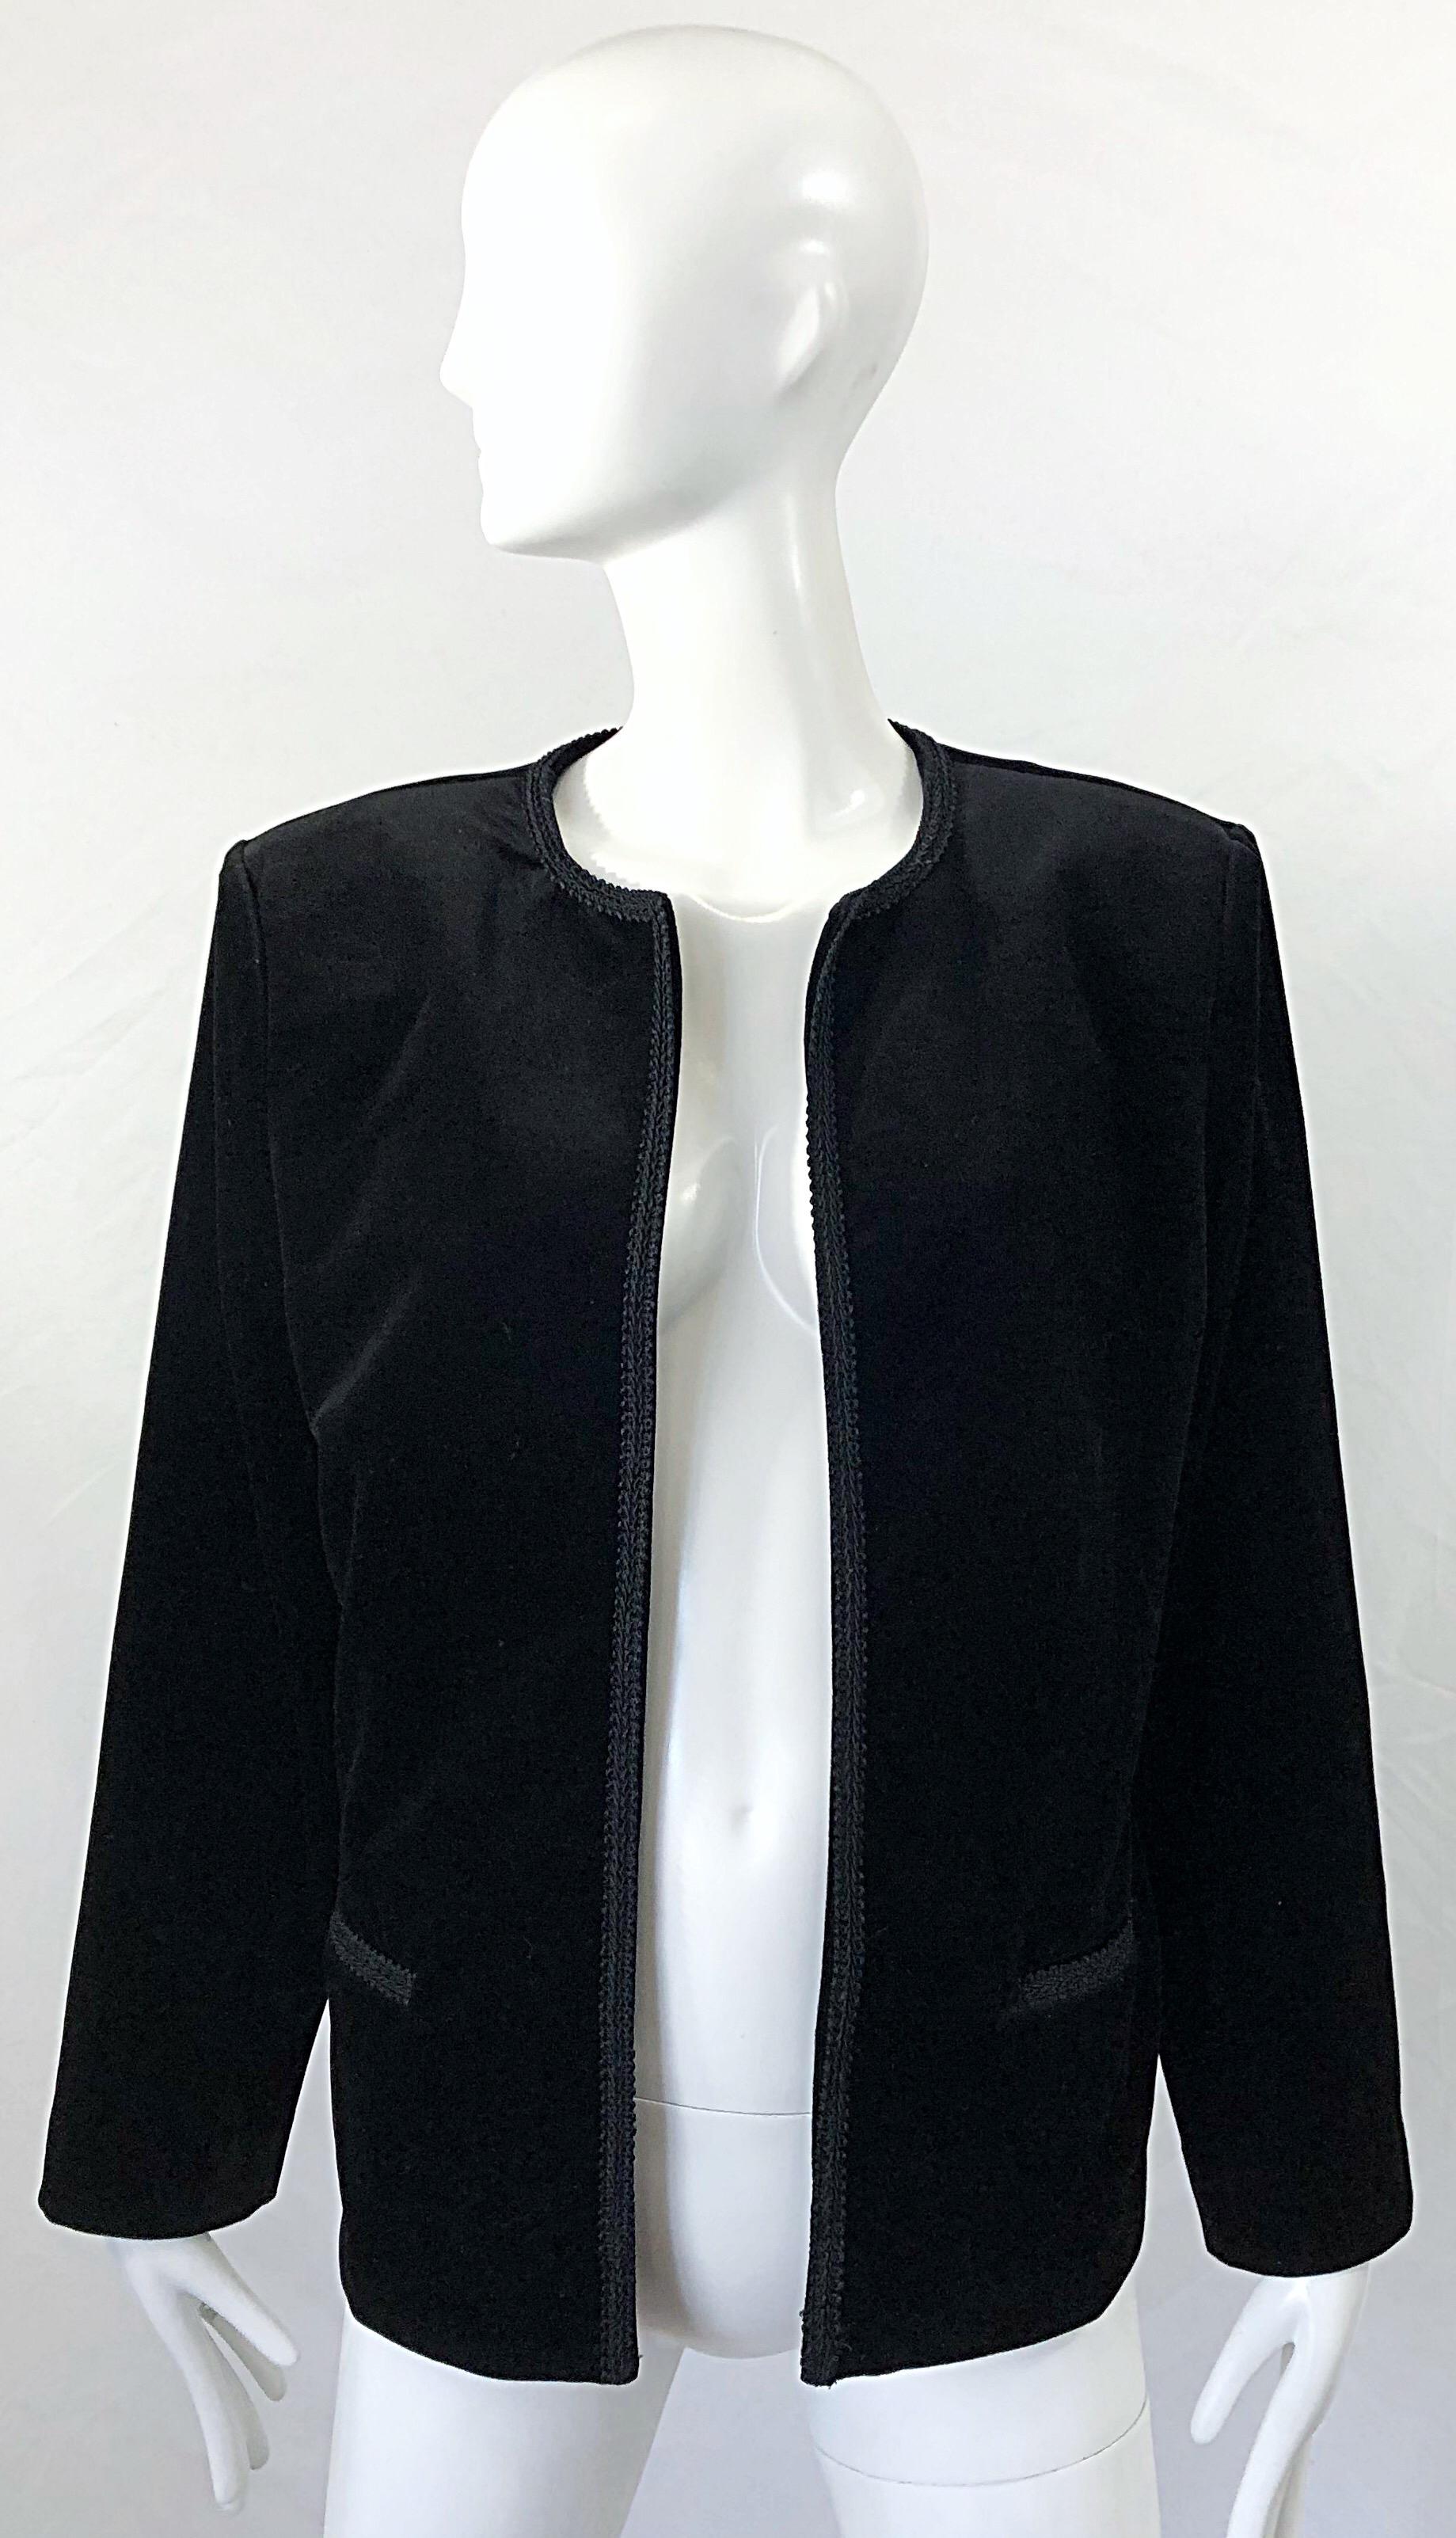 Chic 1980s OSCAR DE LA RENTA black cotton velvet Size 16 jacket ! Features an open front with embrodiered cording down the front and at each pocket. Can easily be dressed up or down. Great with jeans, trosuers, a skirt, or over a dress.
In great